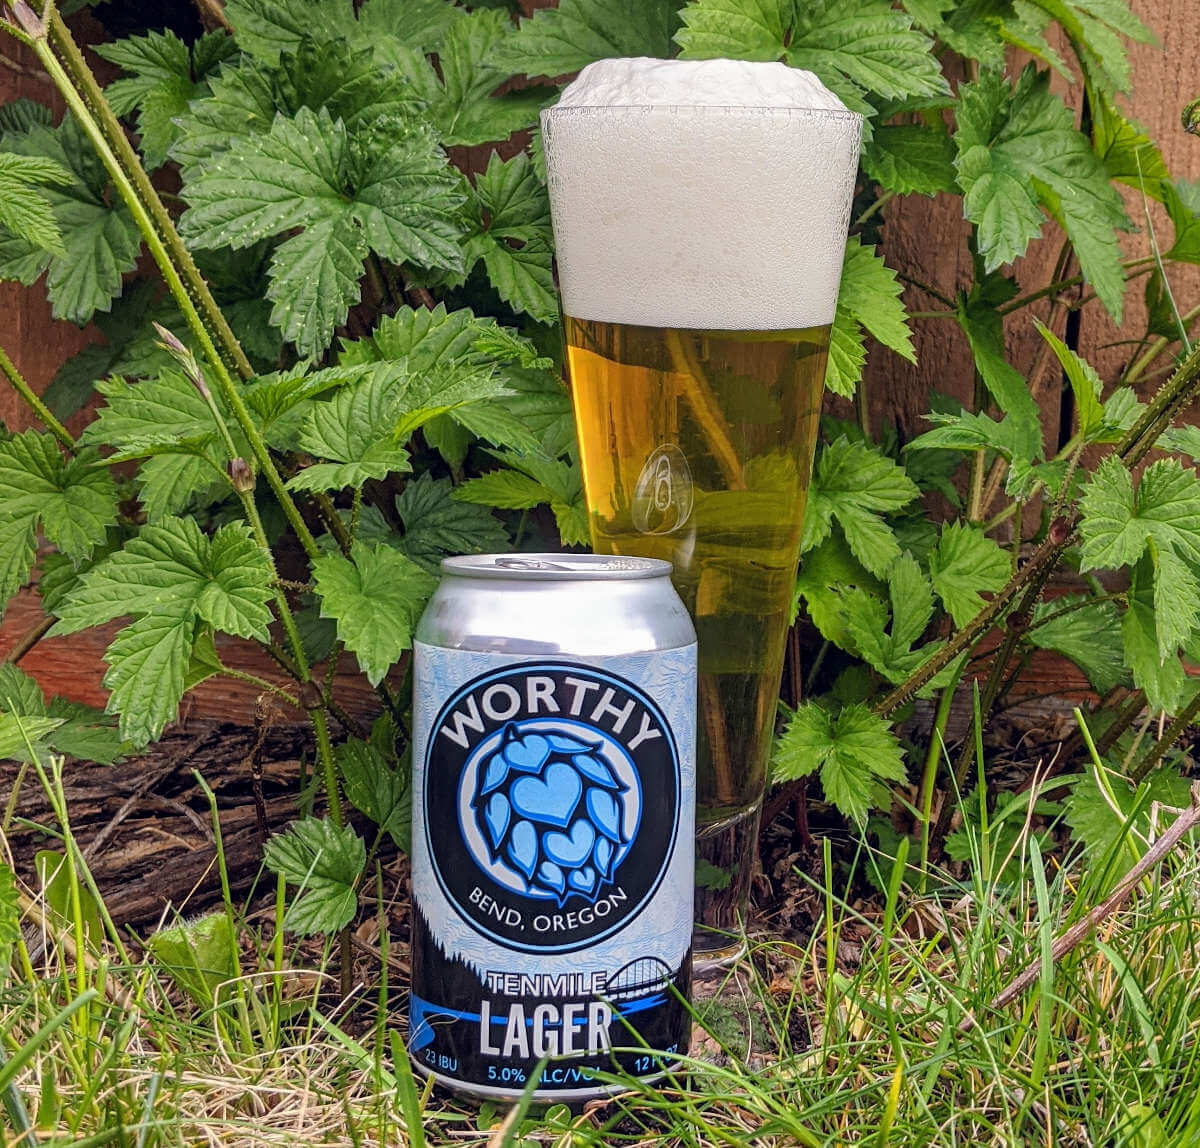 Latest print article: Worthy Brewing’s new Tenmile Lager